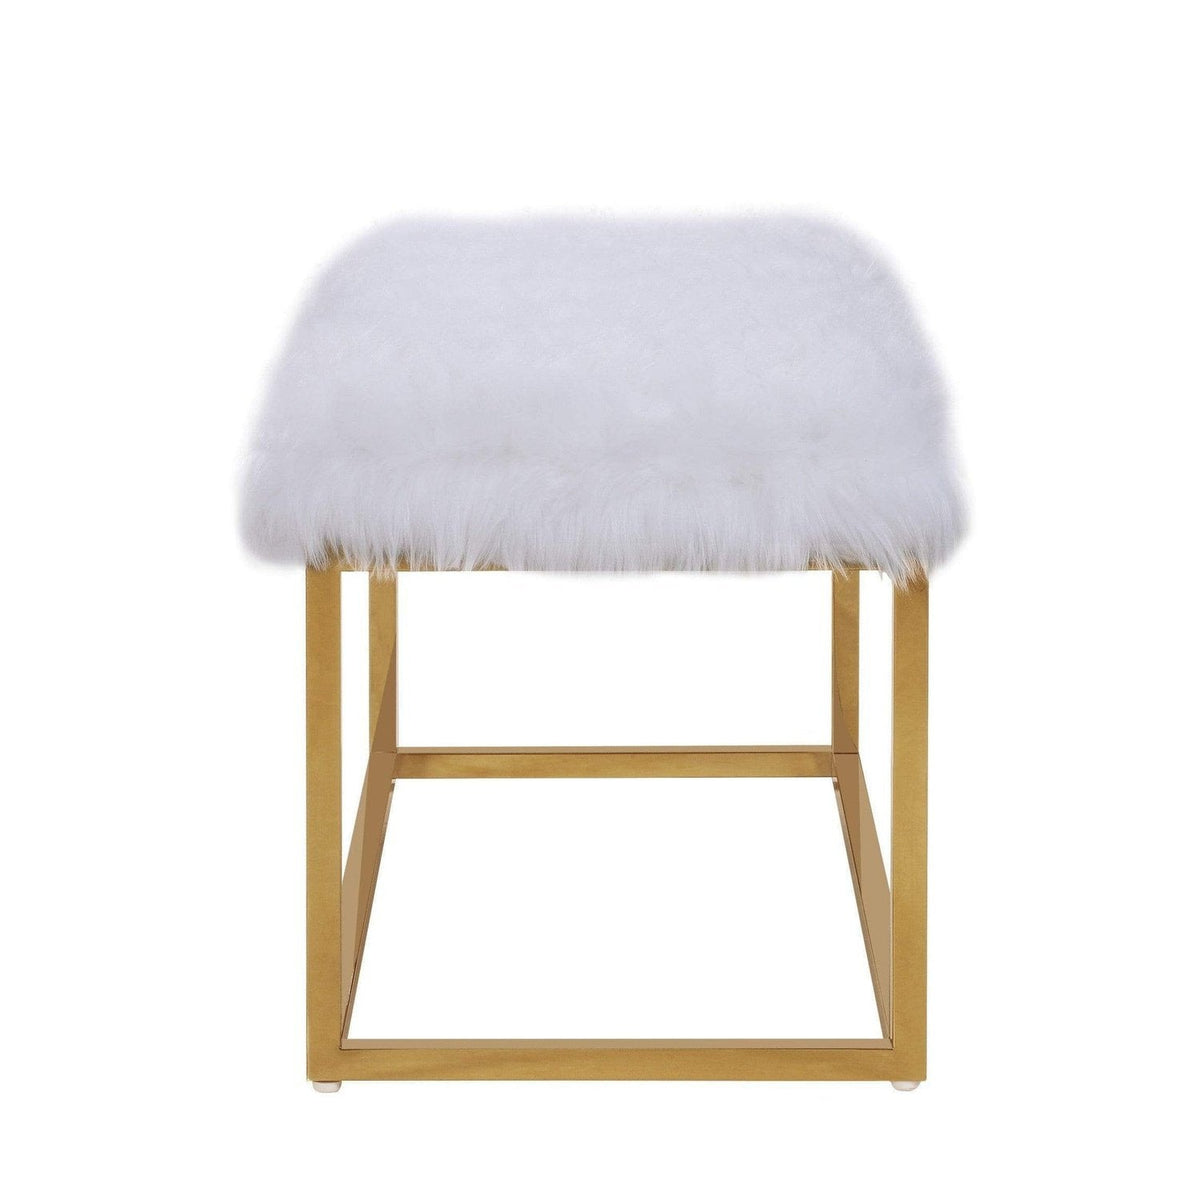 Iconic Home Marilyn Faux Fur Ottoman Bench Gold Metal Frame 